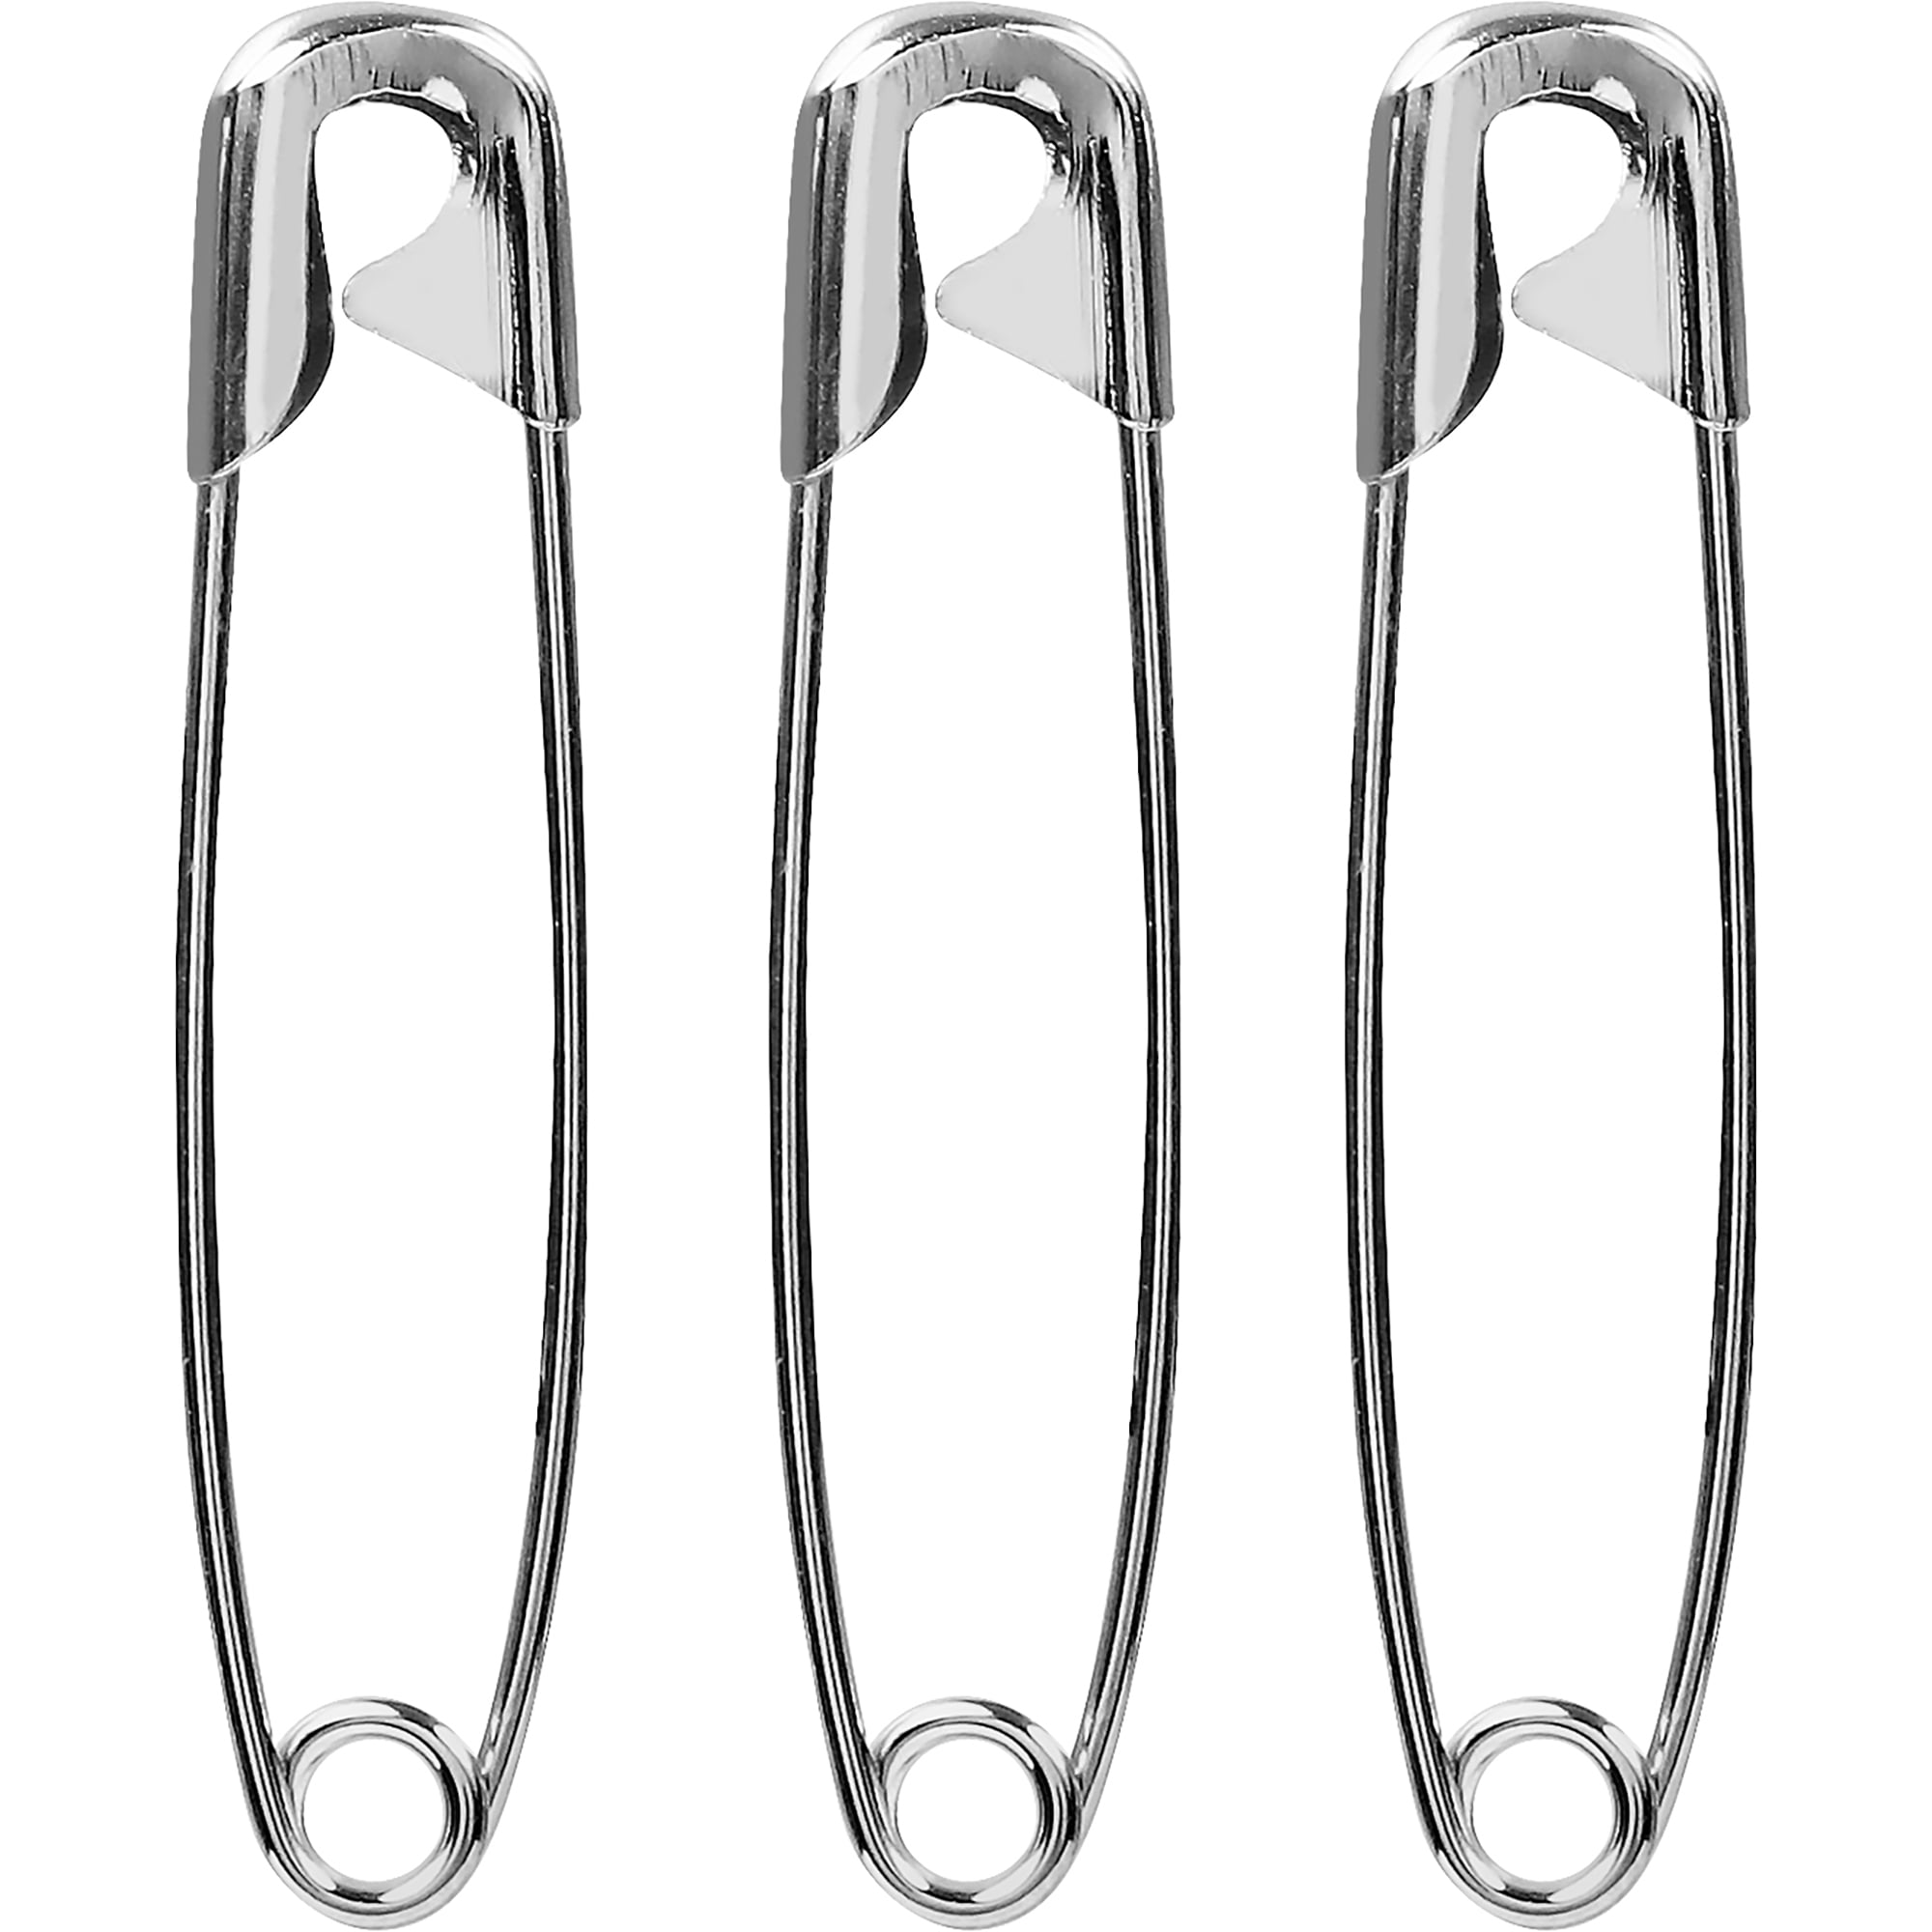 Silver Safety Pins Size 2 - 1.5 inch 144 Pieces Premium Quality